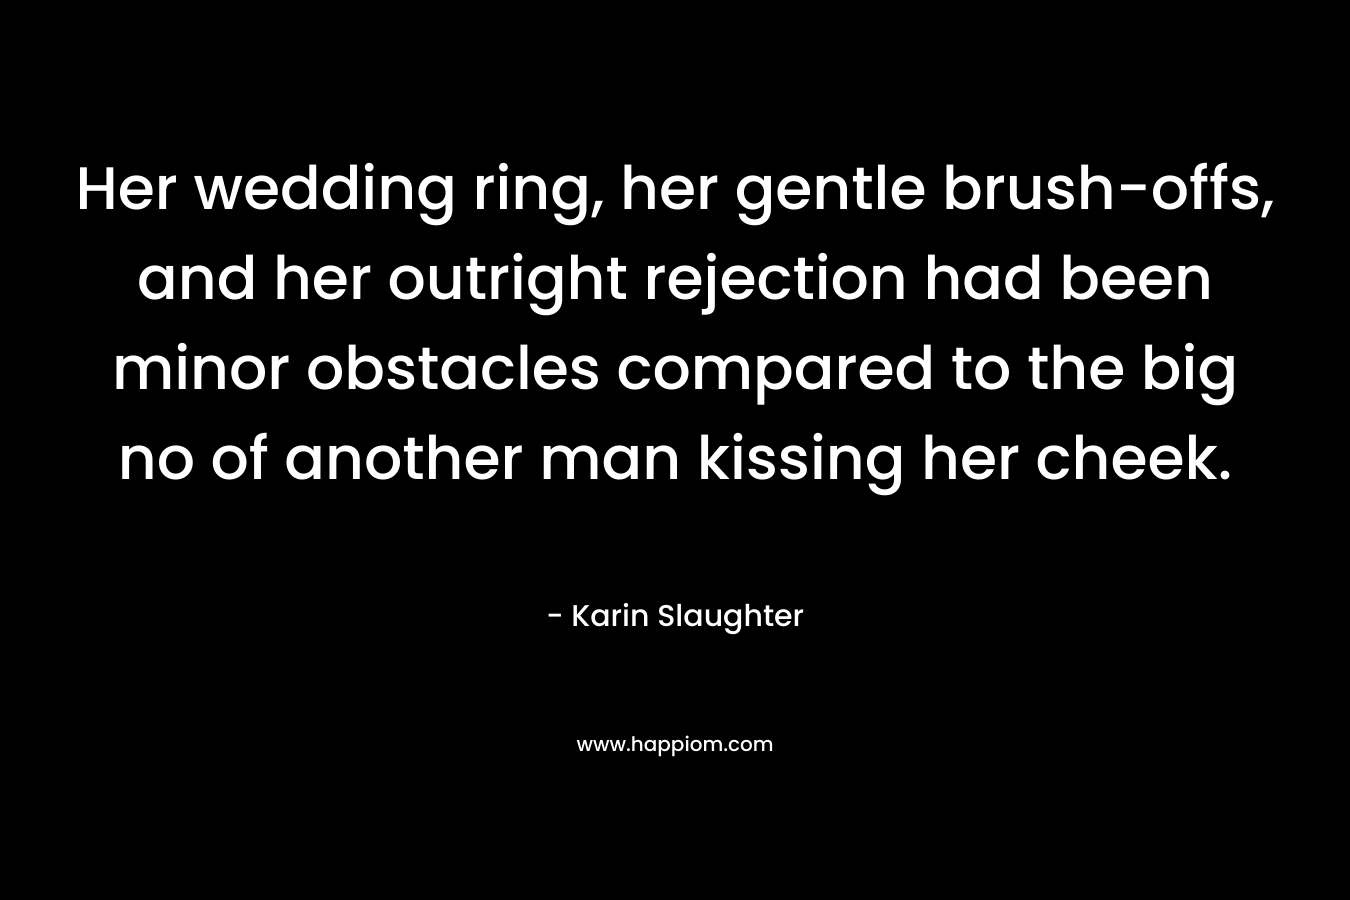 Her wedding ring, her gentle brush-offs, and her outright rejection had been minor obstacles compared to the big no of another man kissing her cheek.